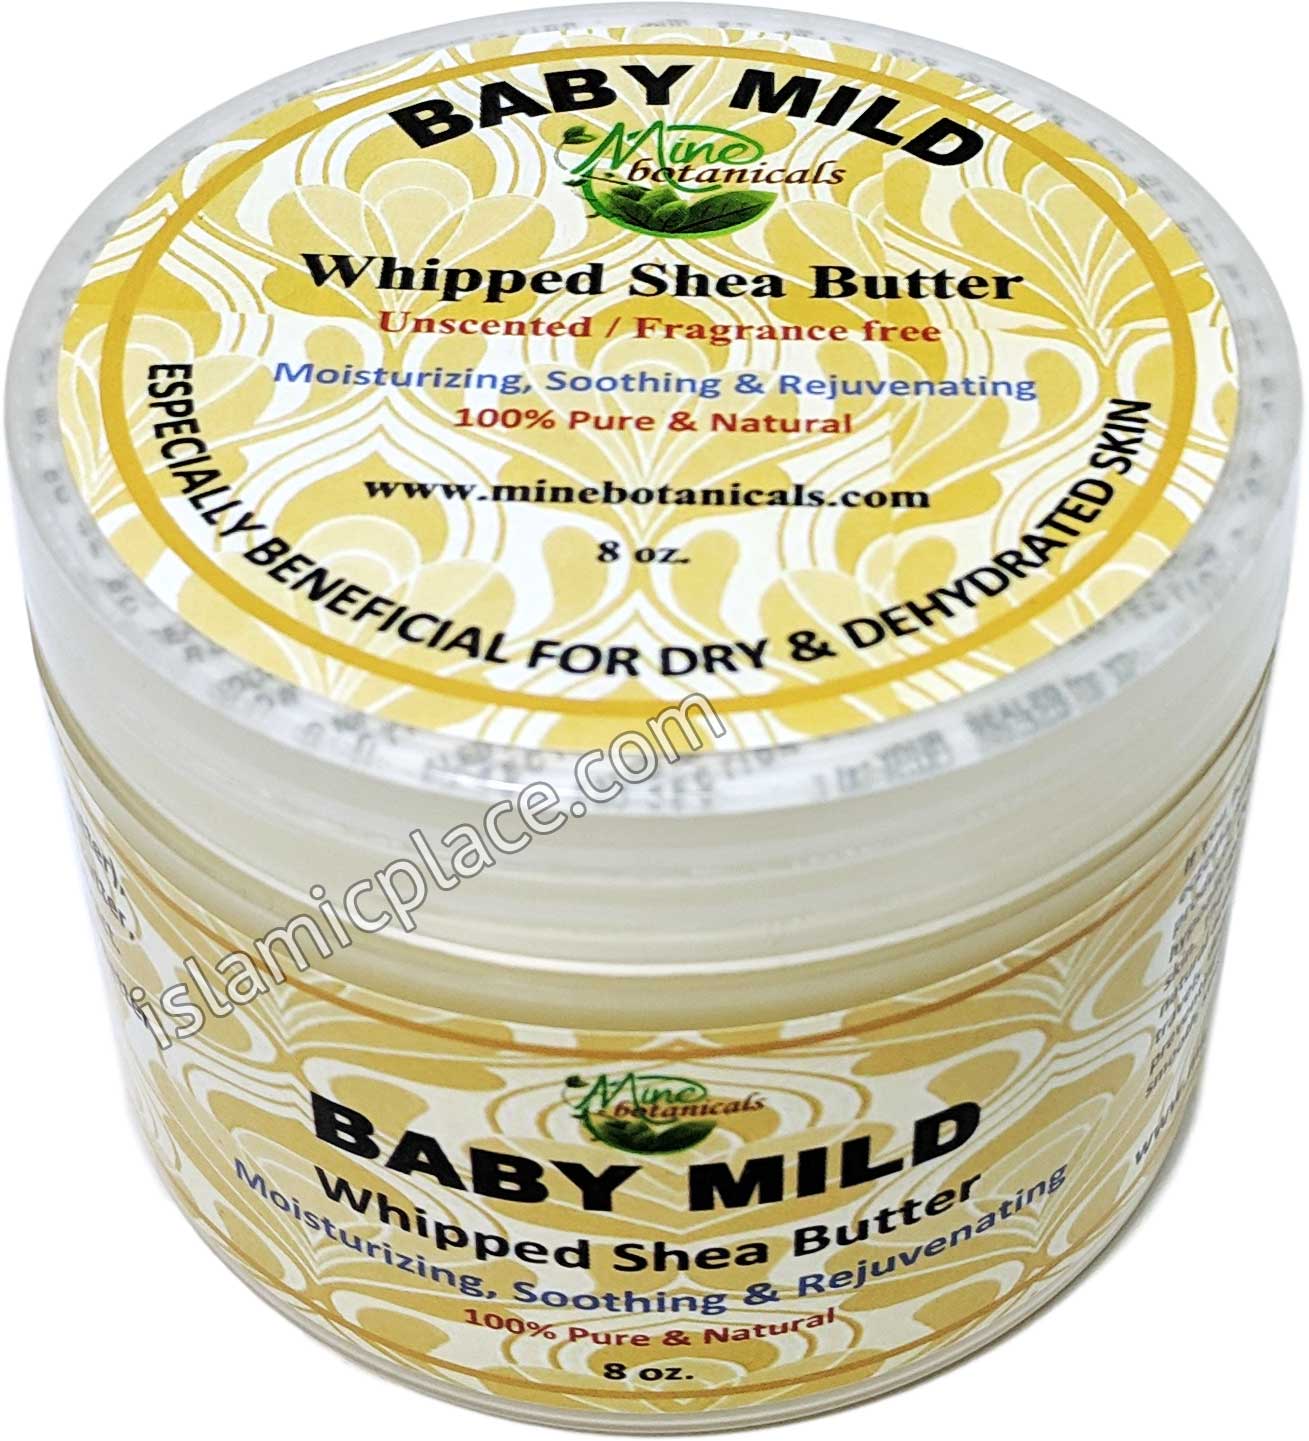 Baby Mild Whipped Shea Butter - Unscented - Fragrance Free